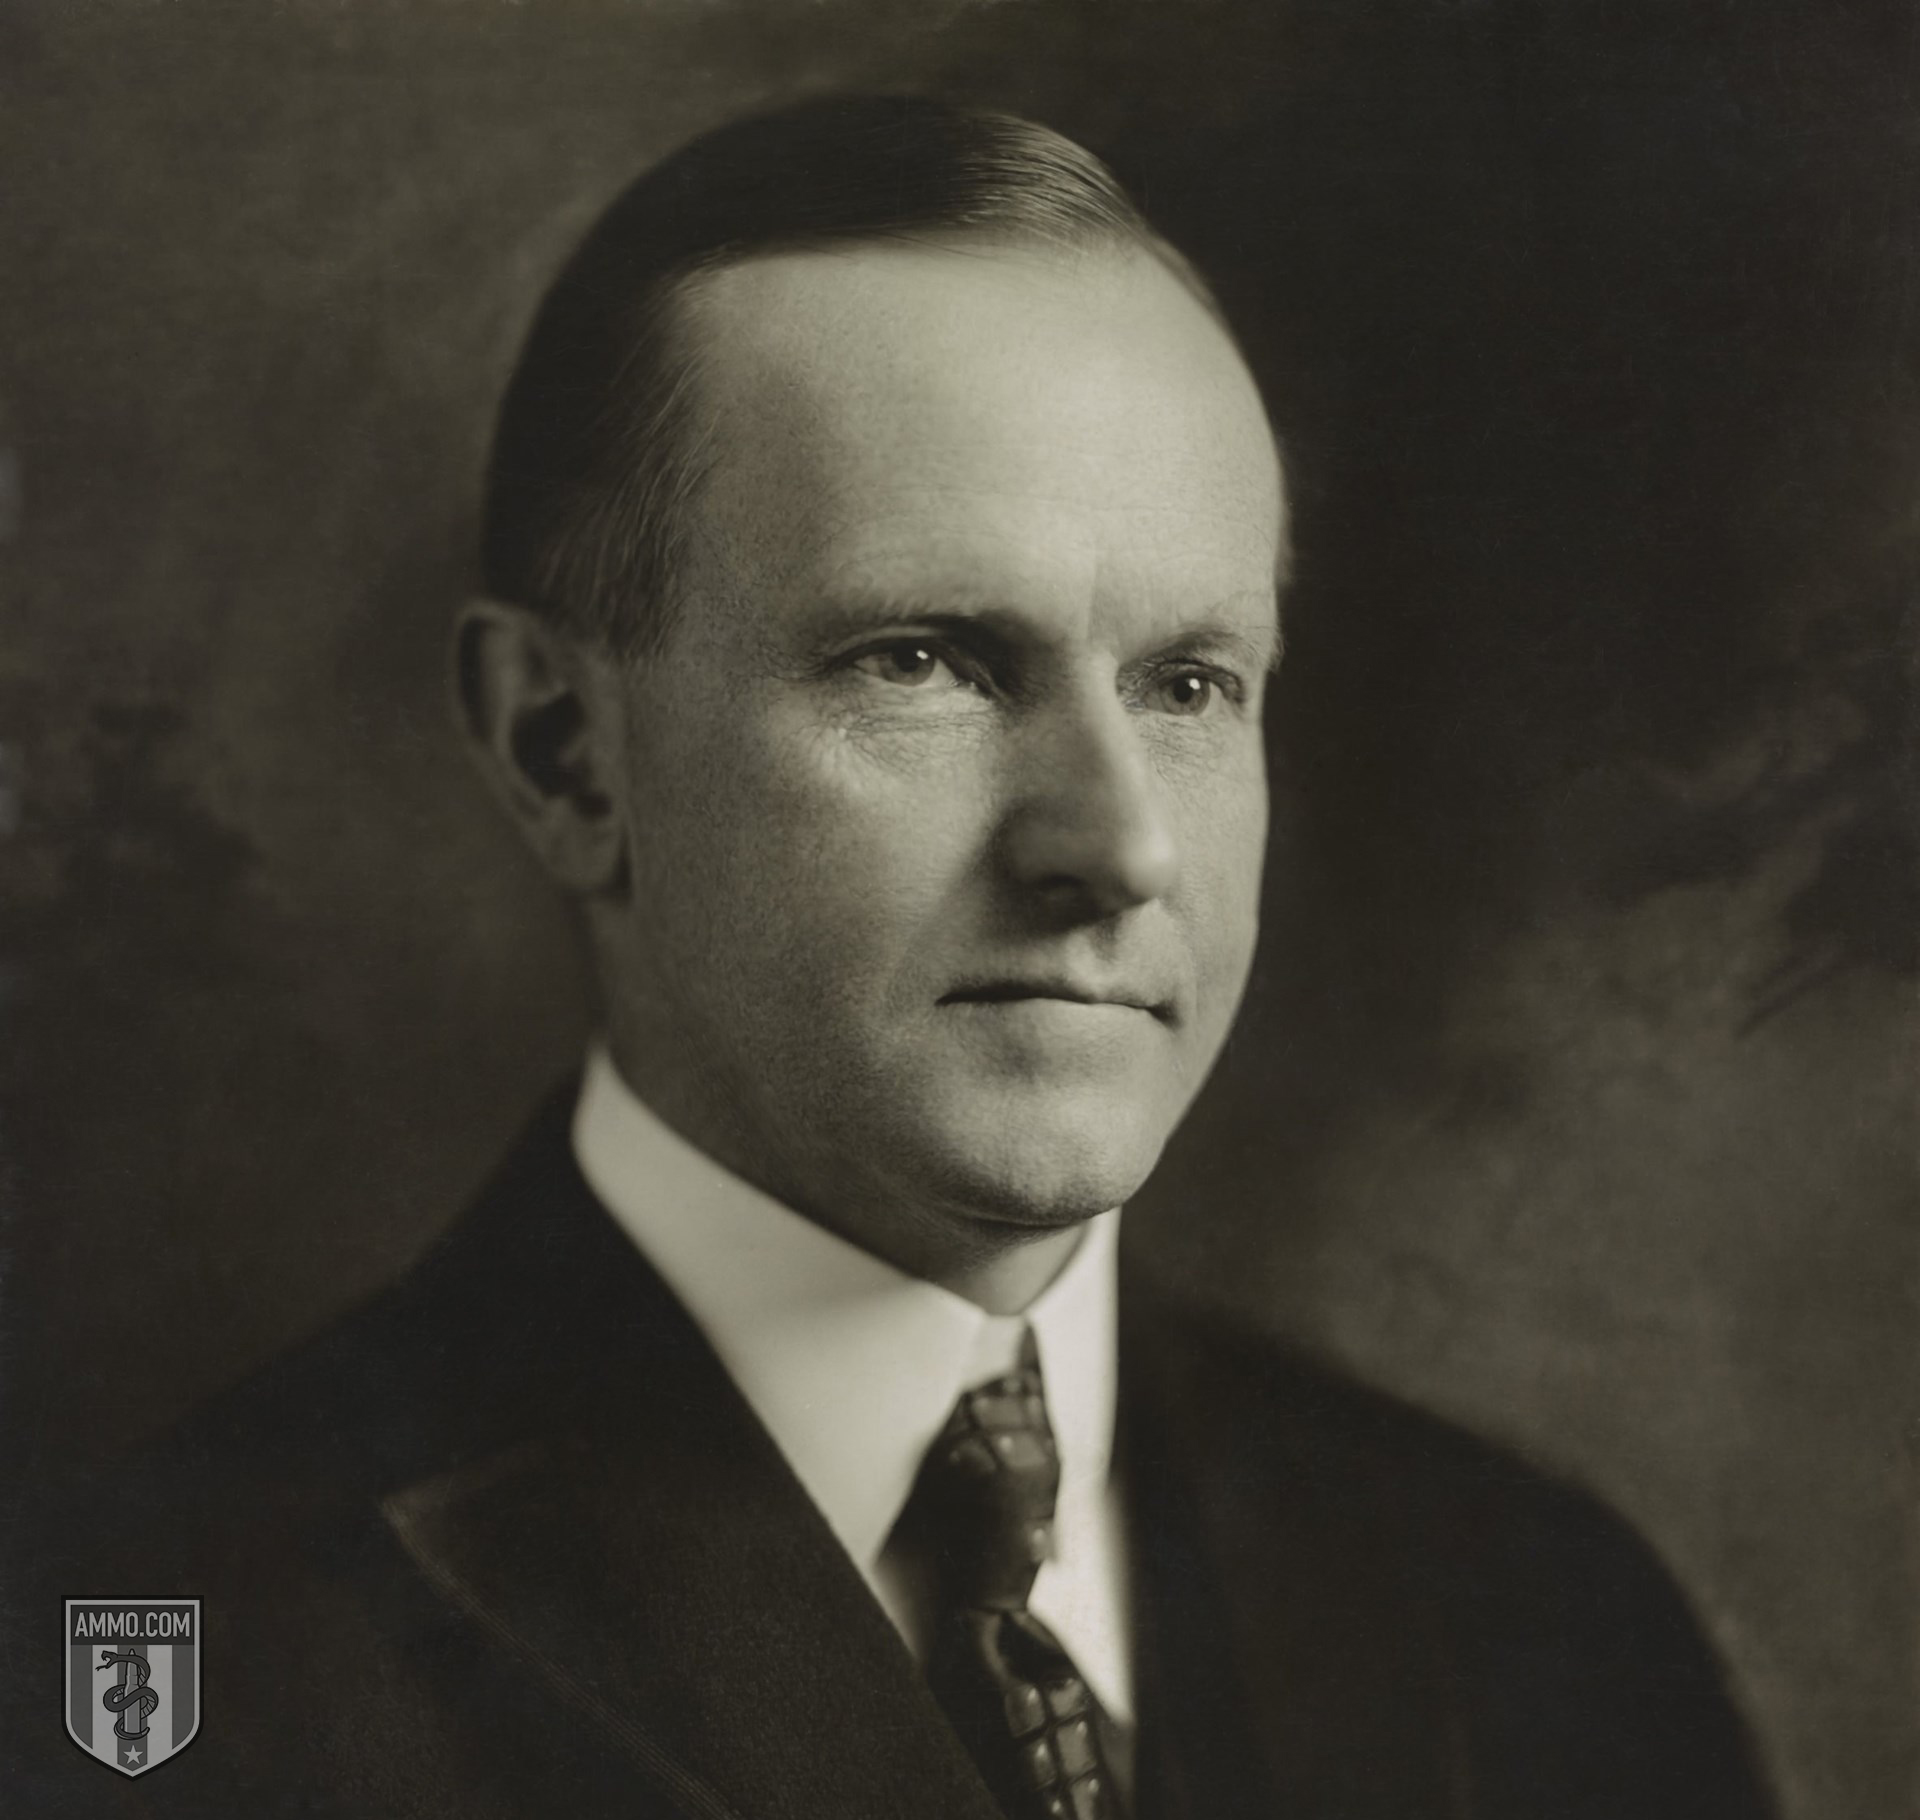 Calvin Coolidge Quotes: Quotes by American President Calvin Coolidge